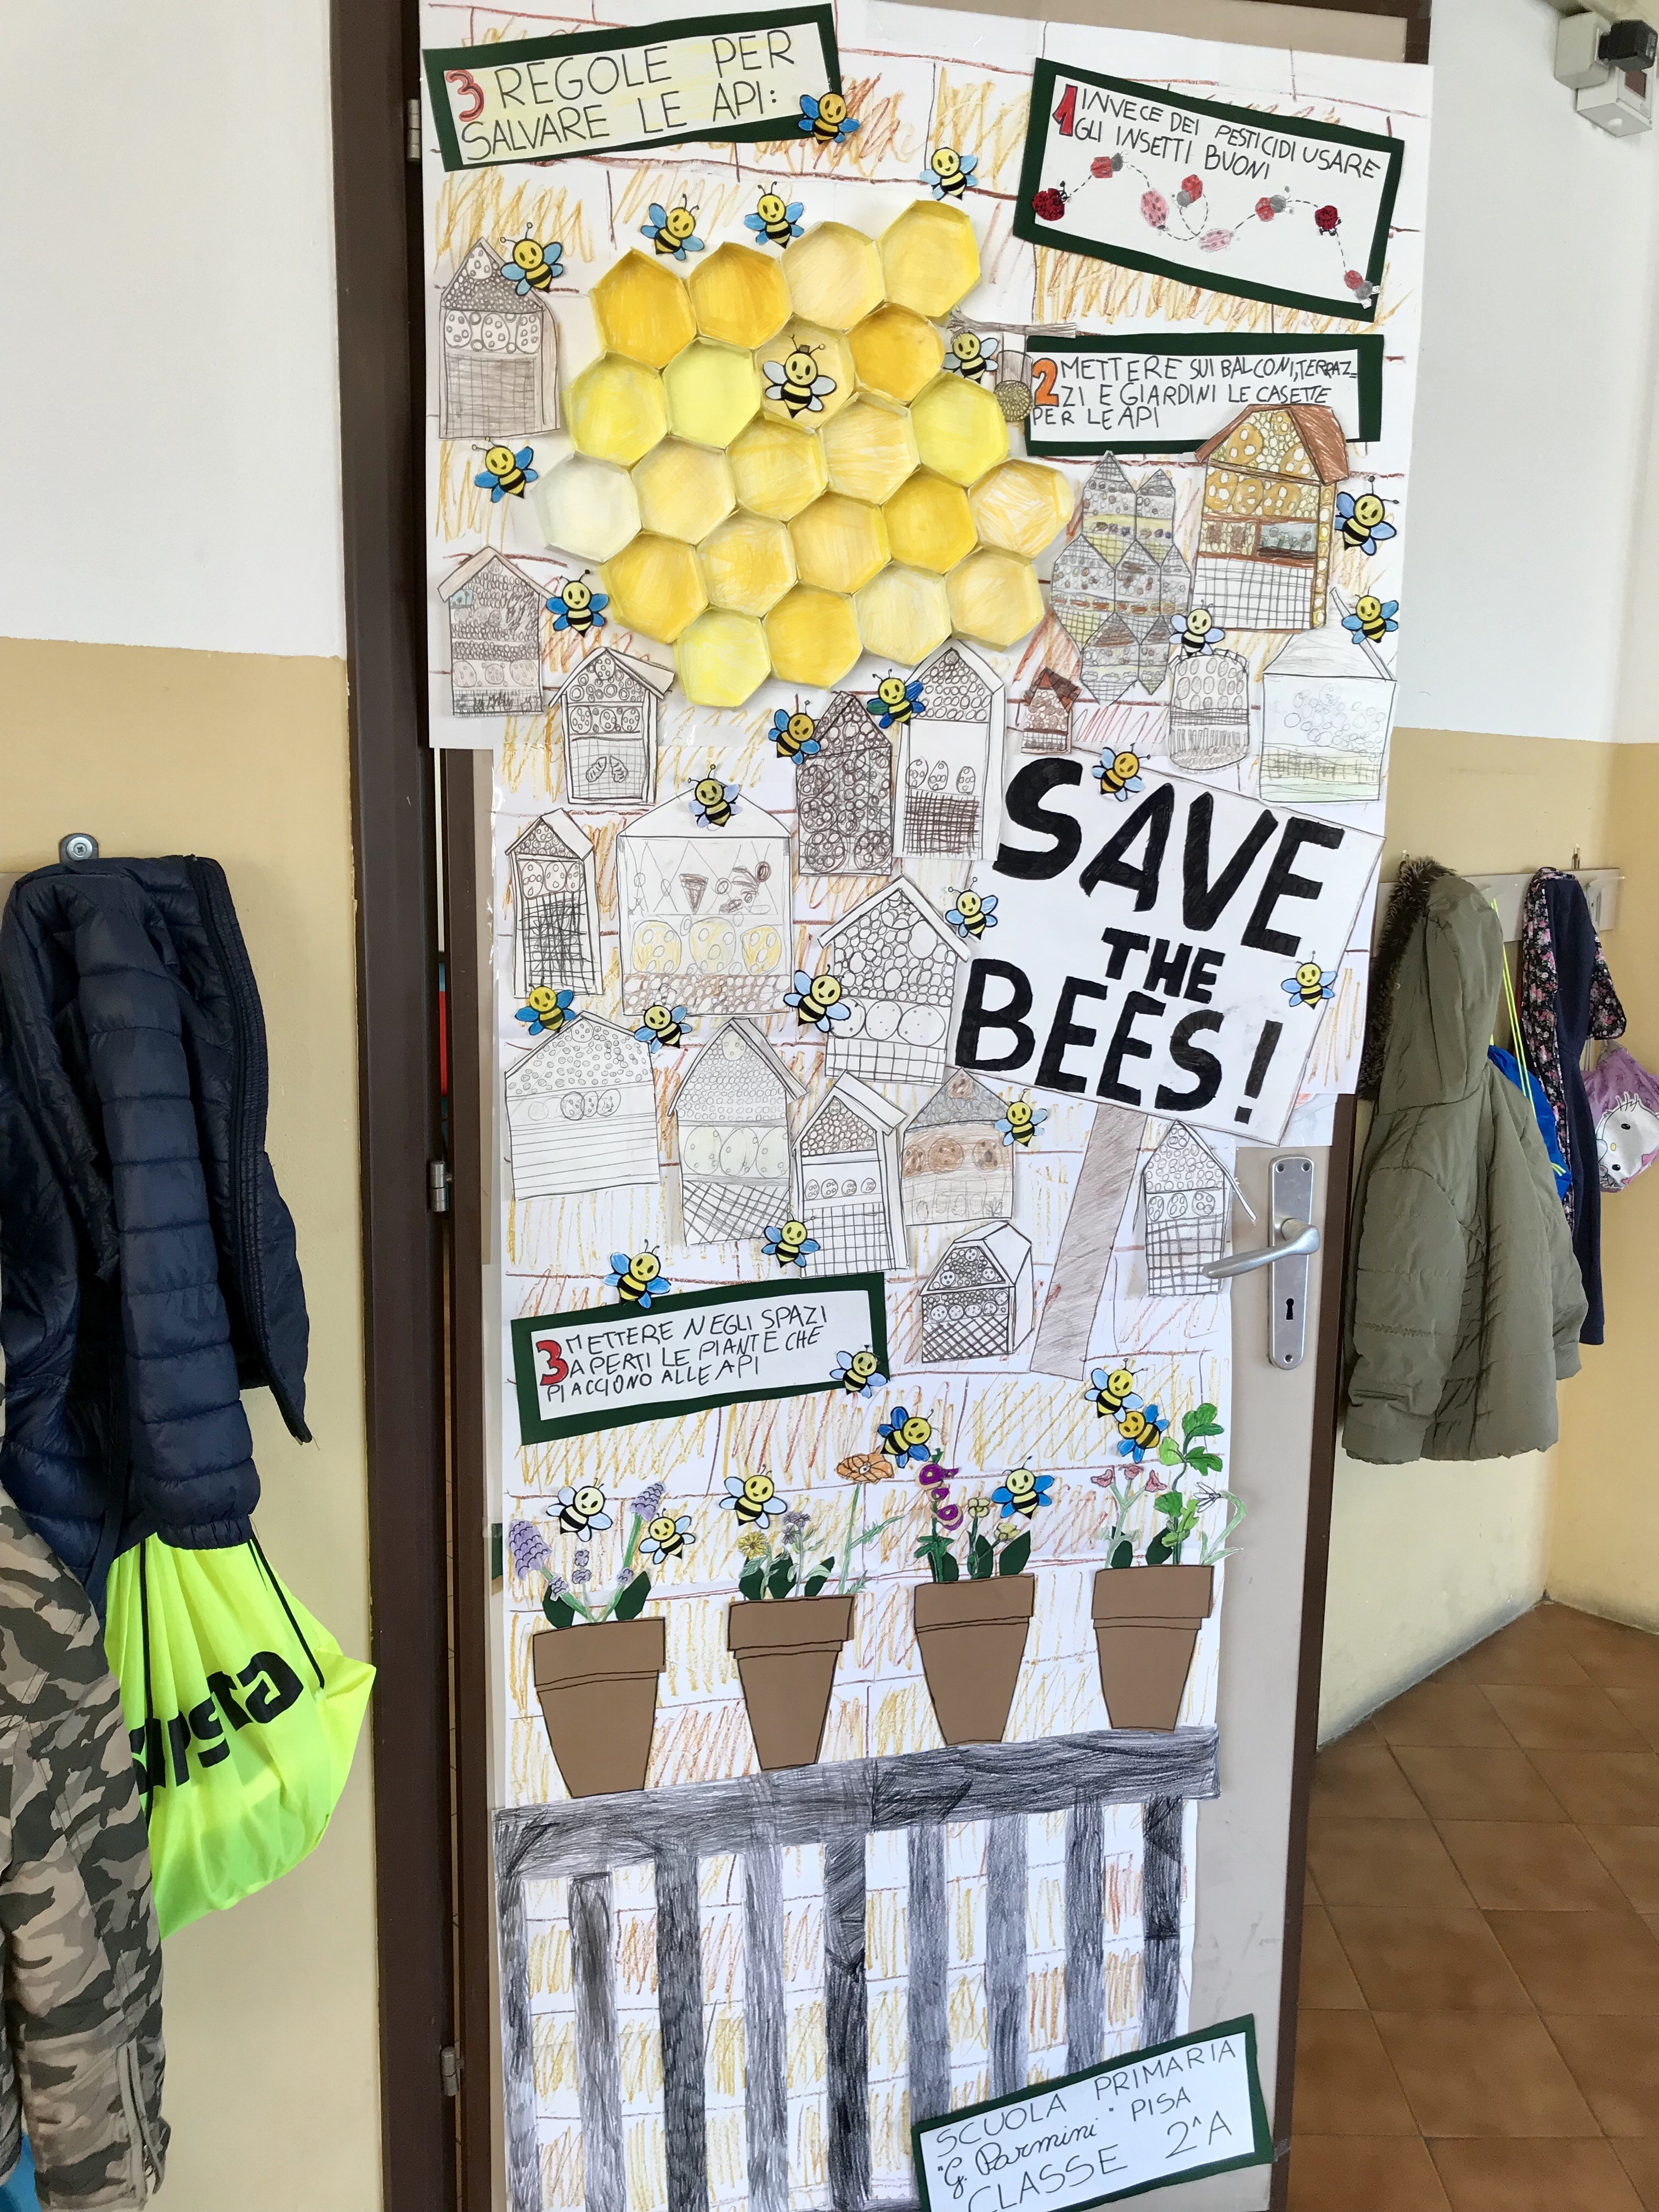 Save the bees! Lavoro completo